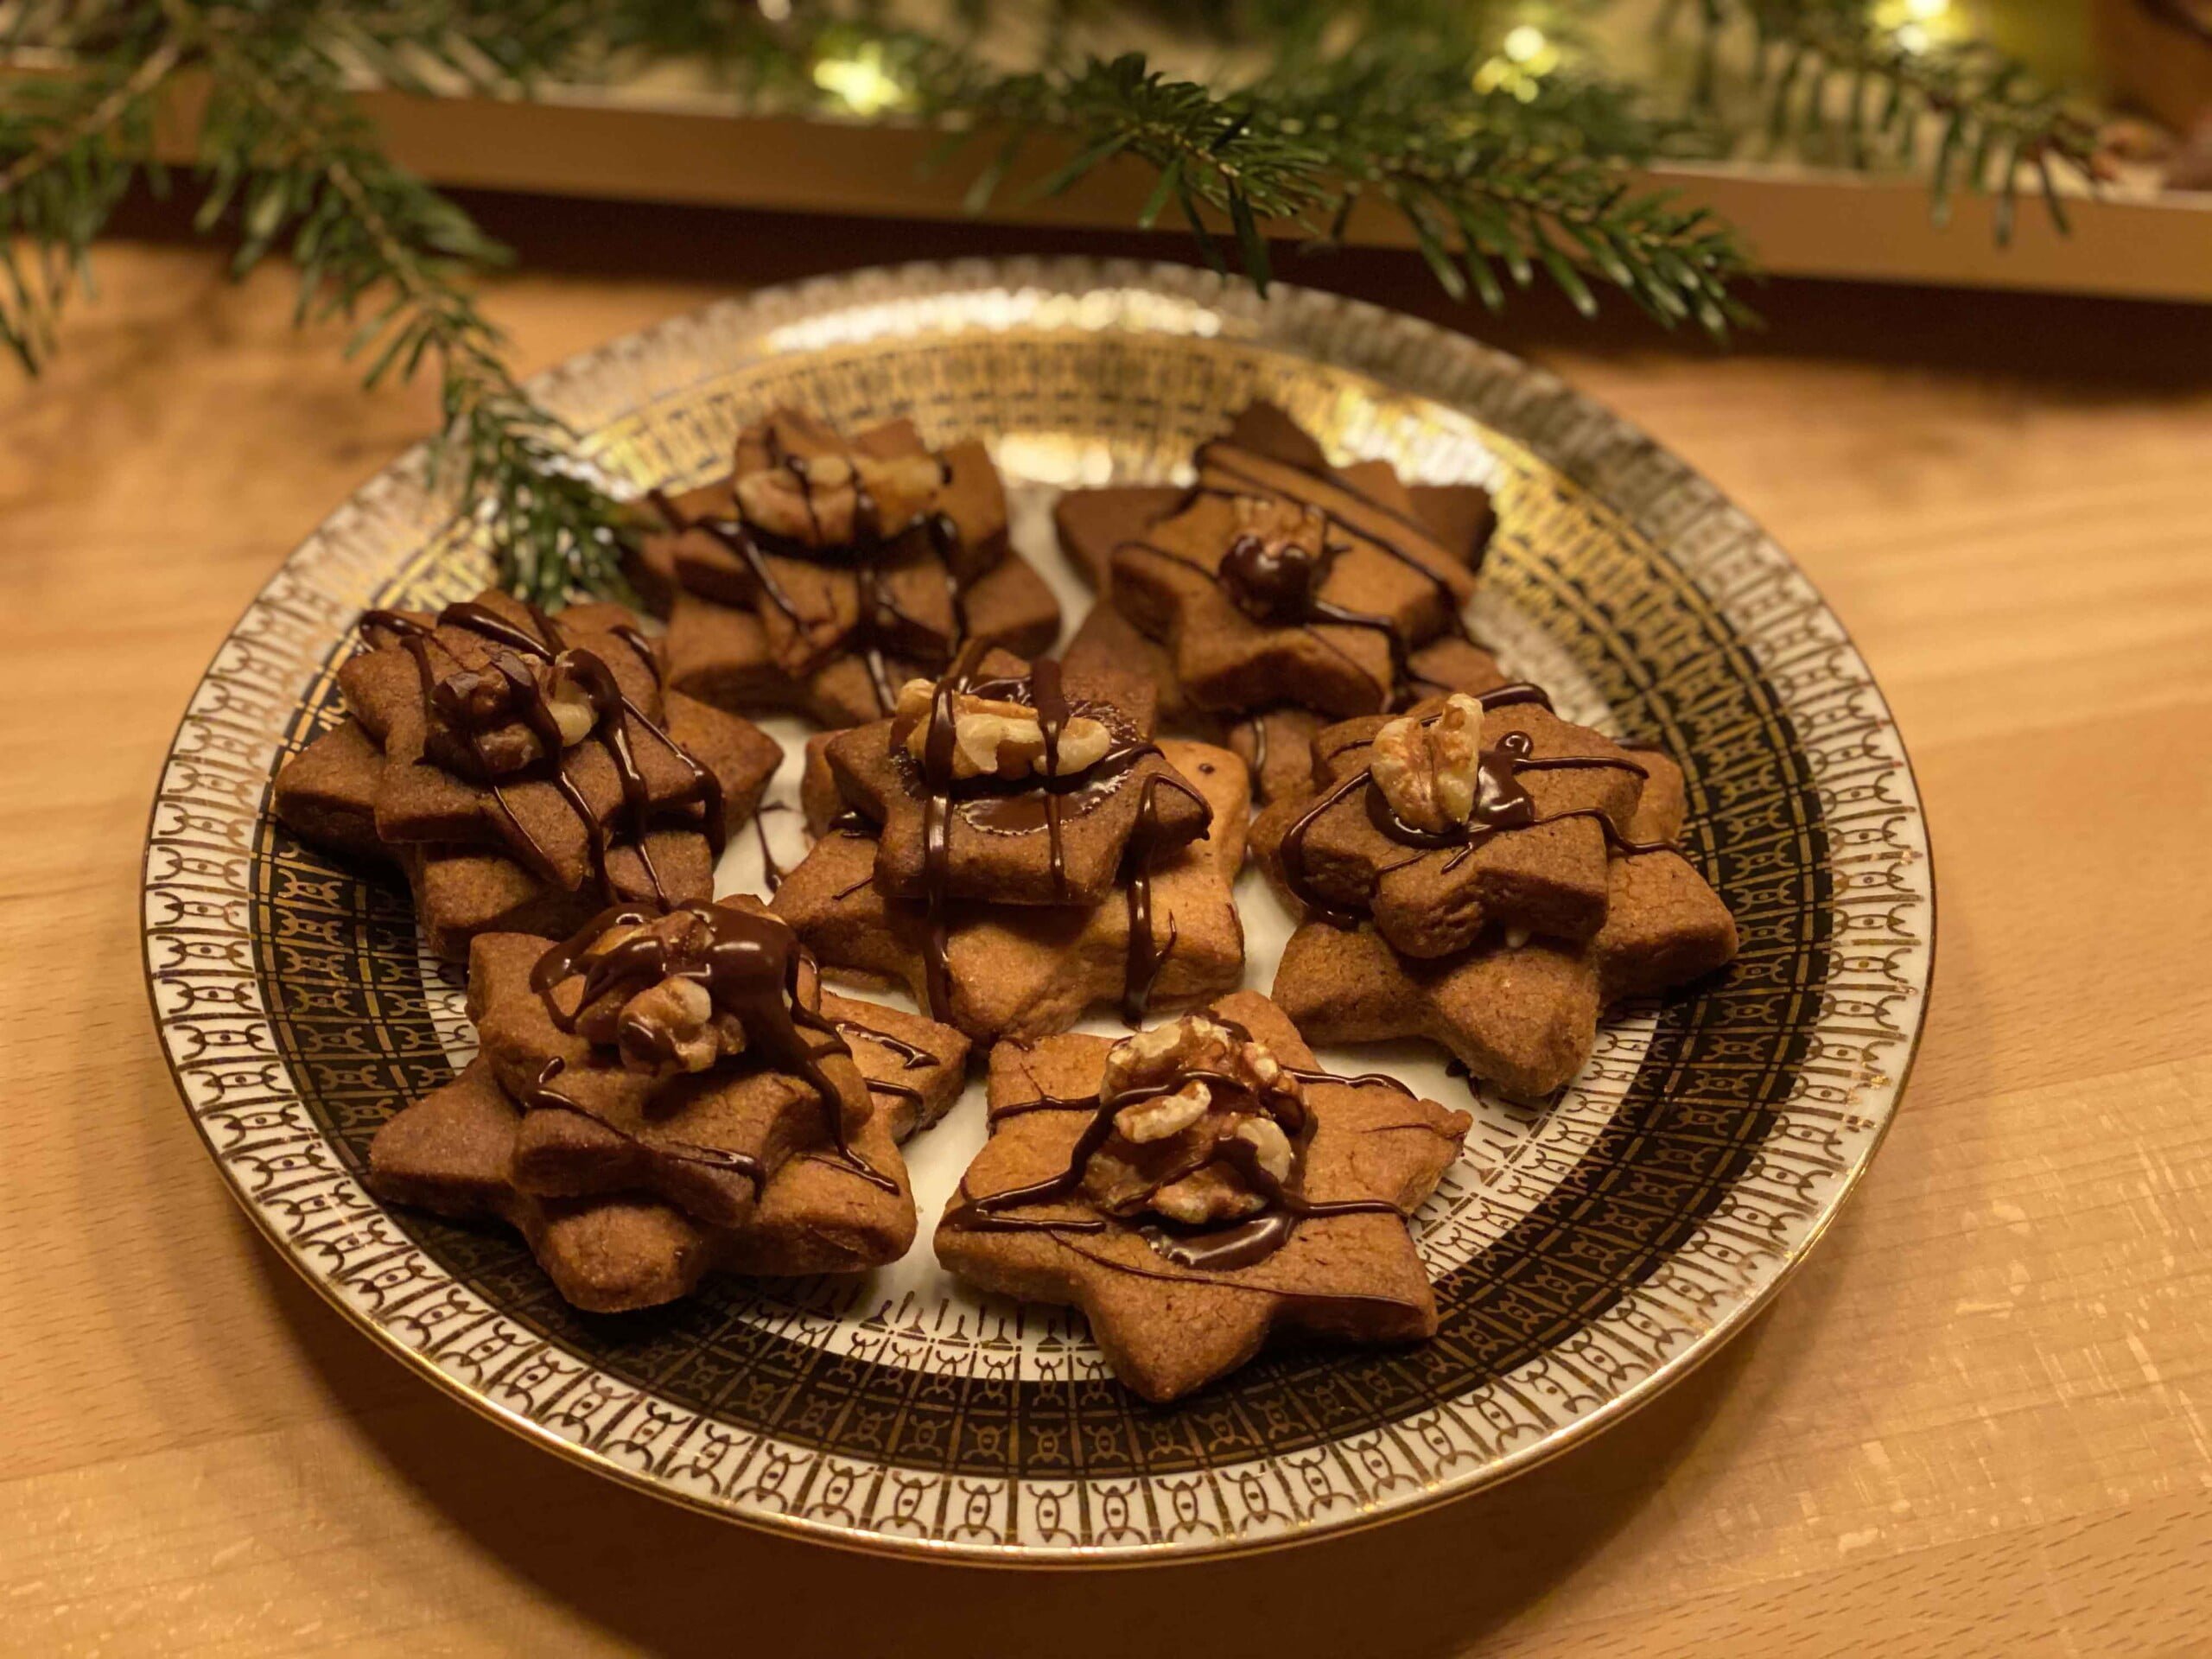 Star cookies with chocolate and walnuts